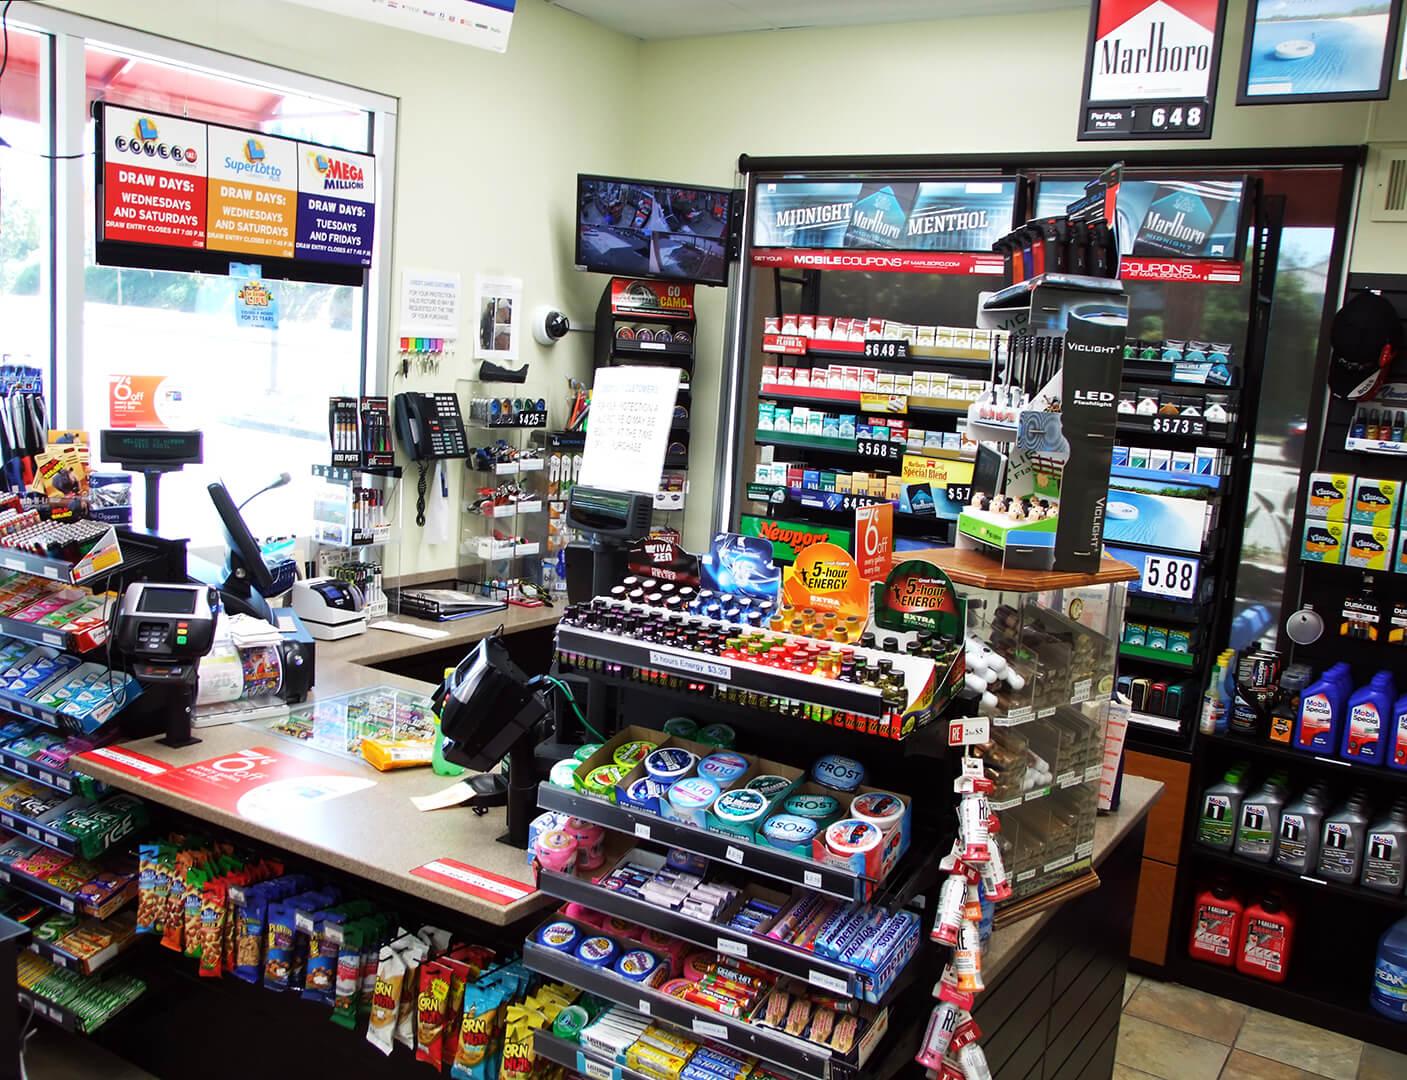 Harbor View Car Service Logo - HarborView Car Service Station Snack - $20 Smog Check Coupons ...